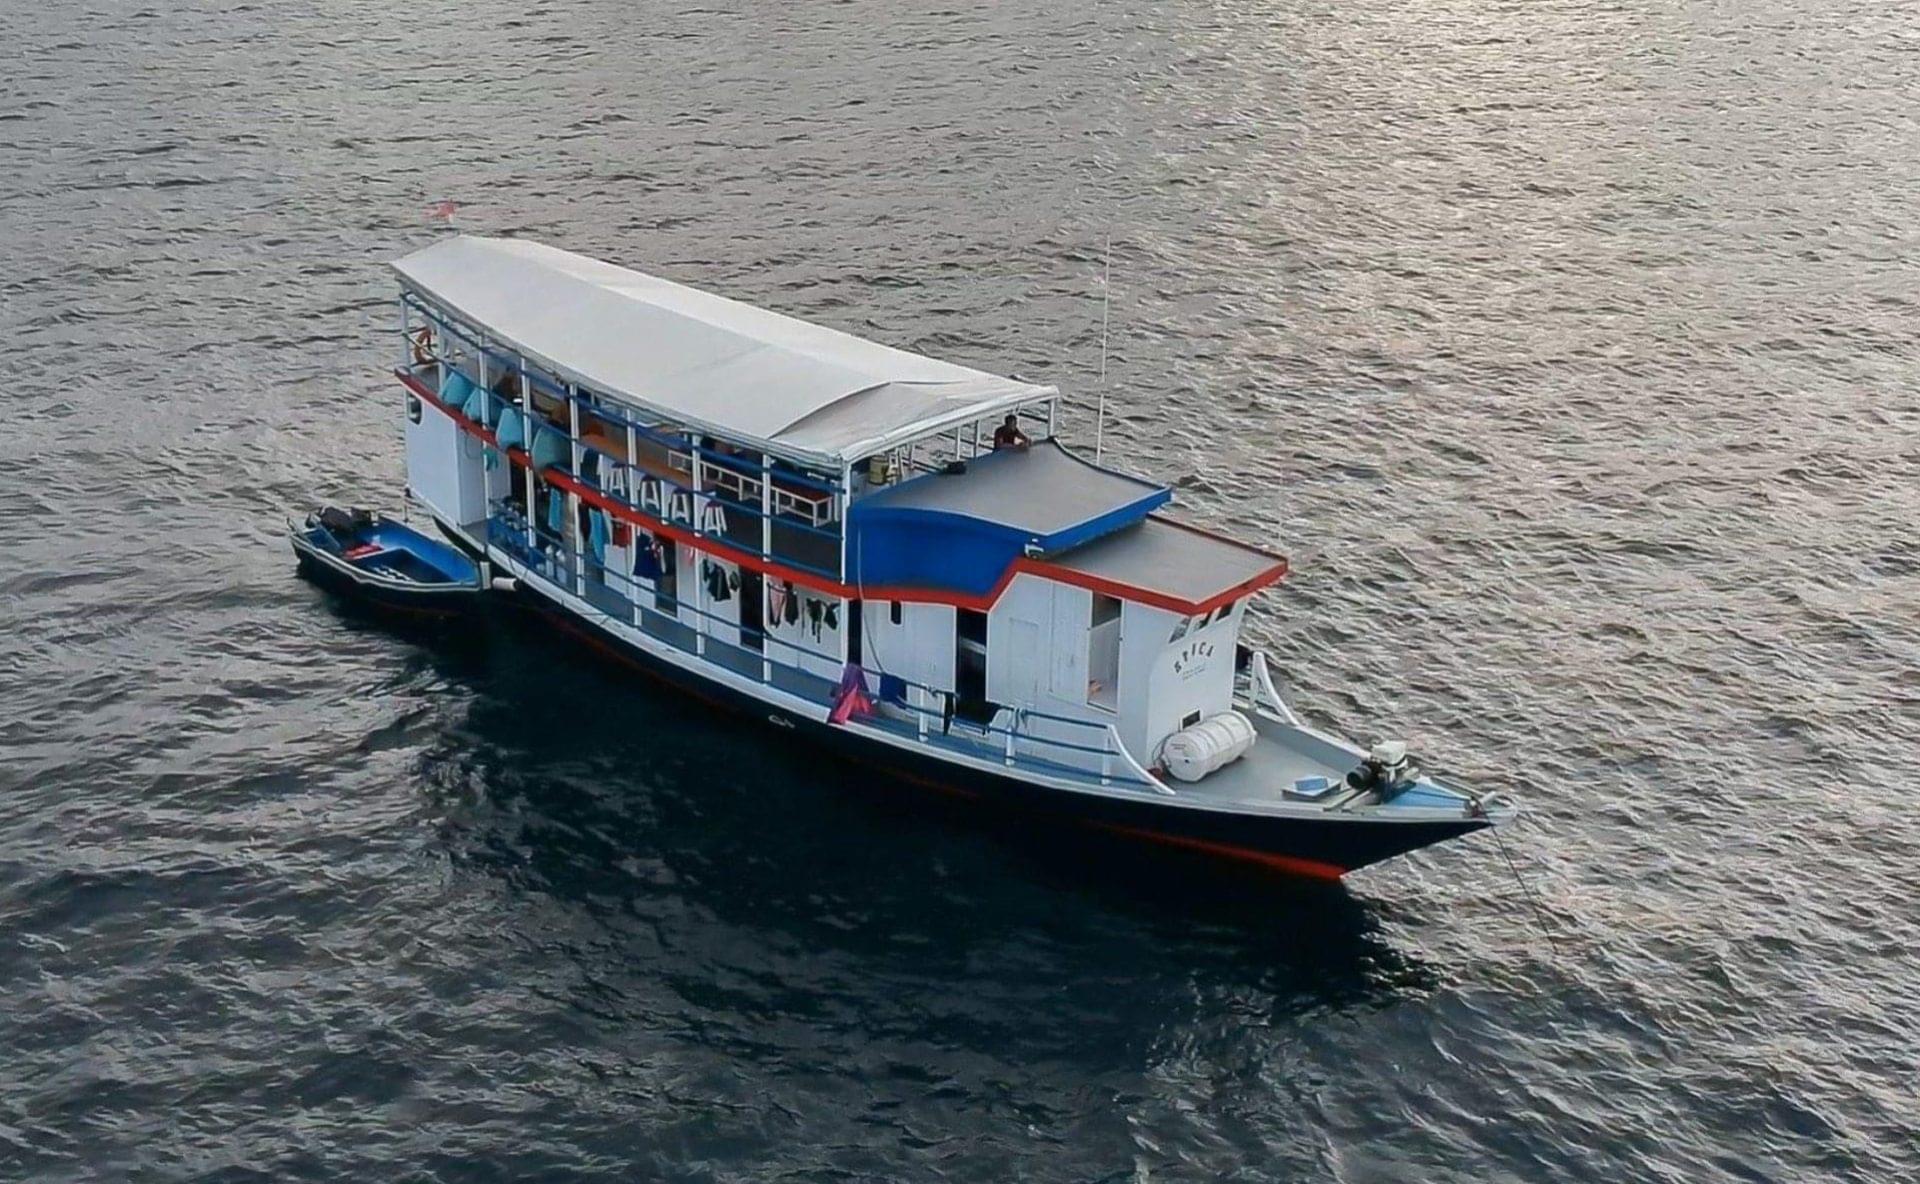 an aeiral view of the Epica, a scuba liveaboard boat in Indonesia